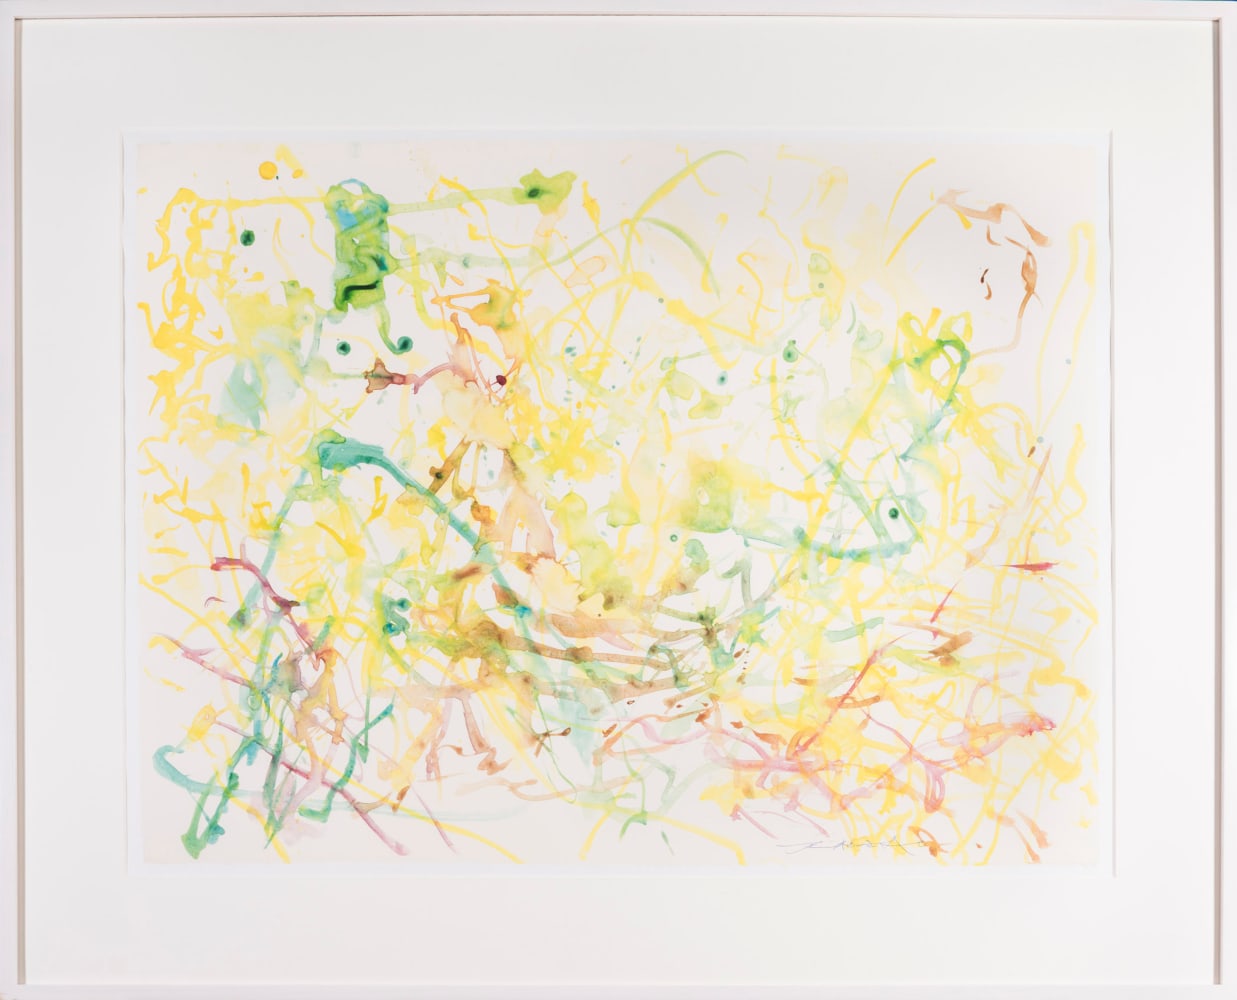 Untitled, 2005

watercolor on paper

22 3/8 x 29 7/8 in. / 57 x 76 cm